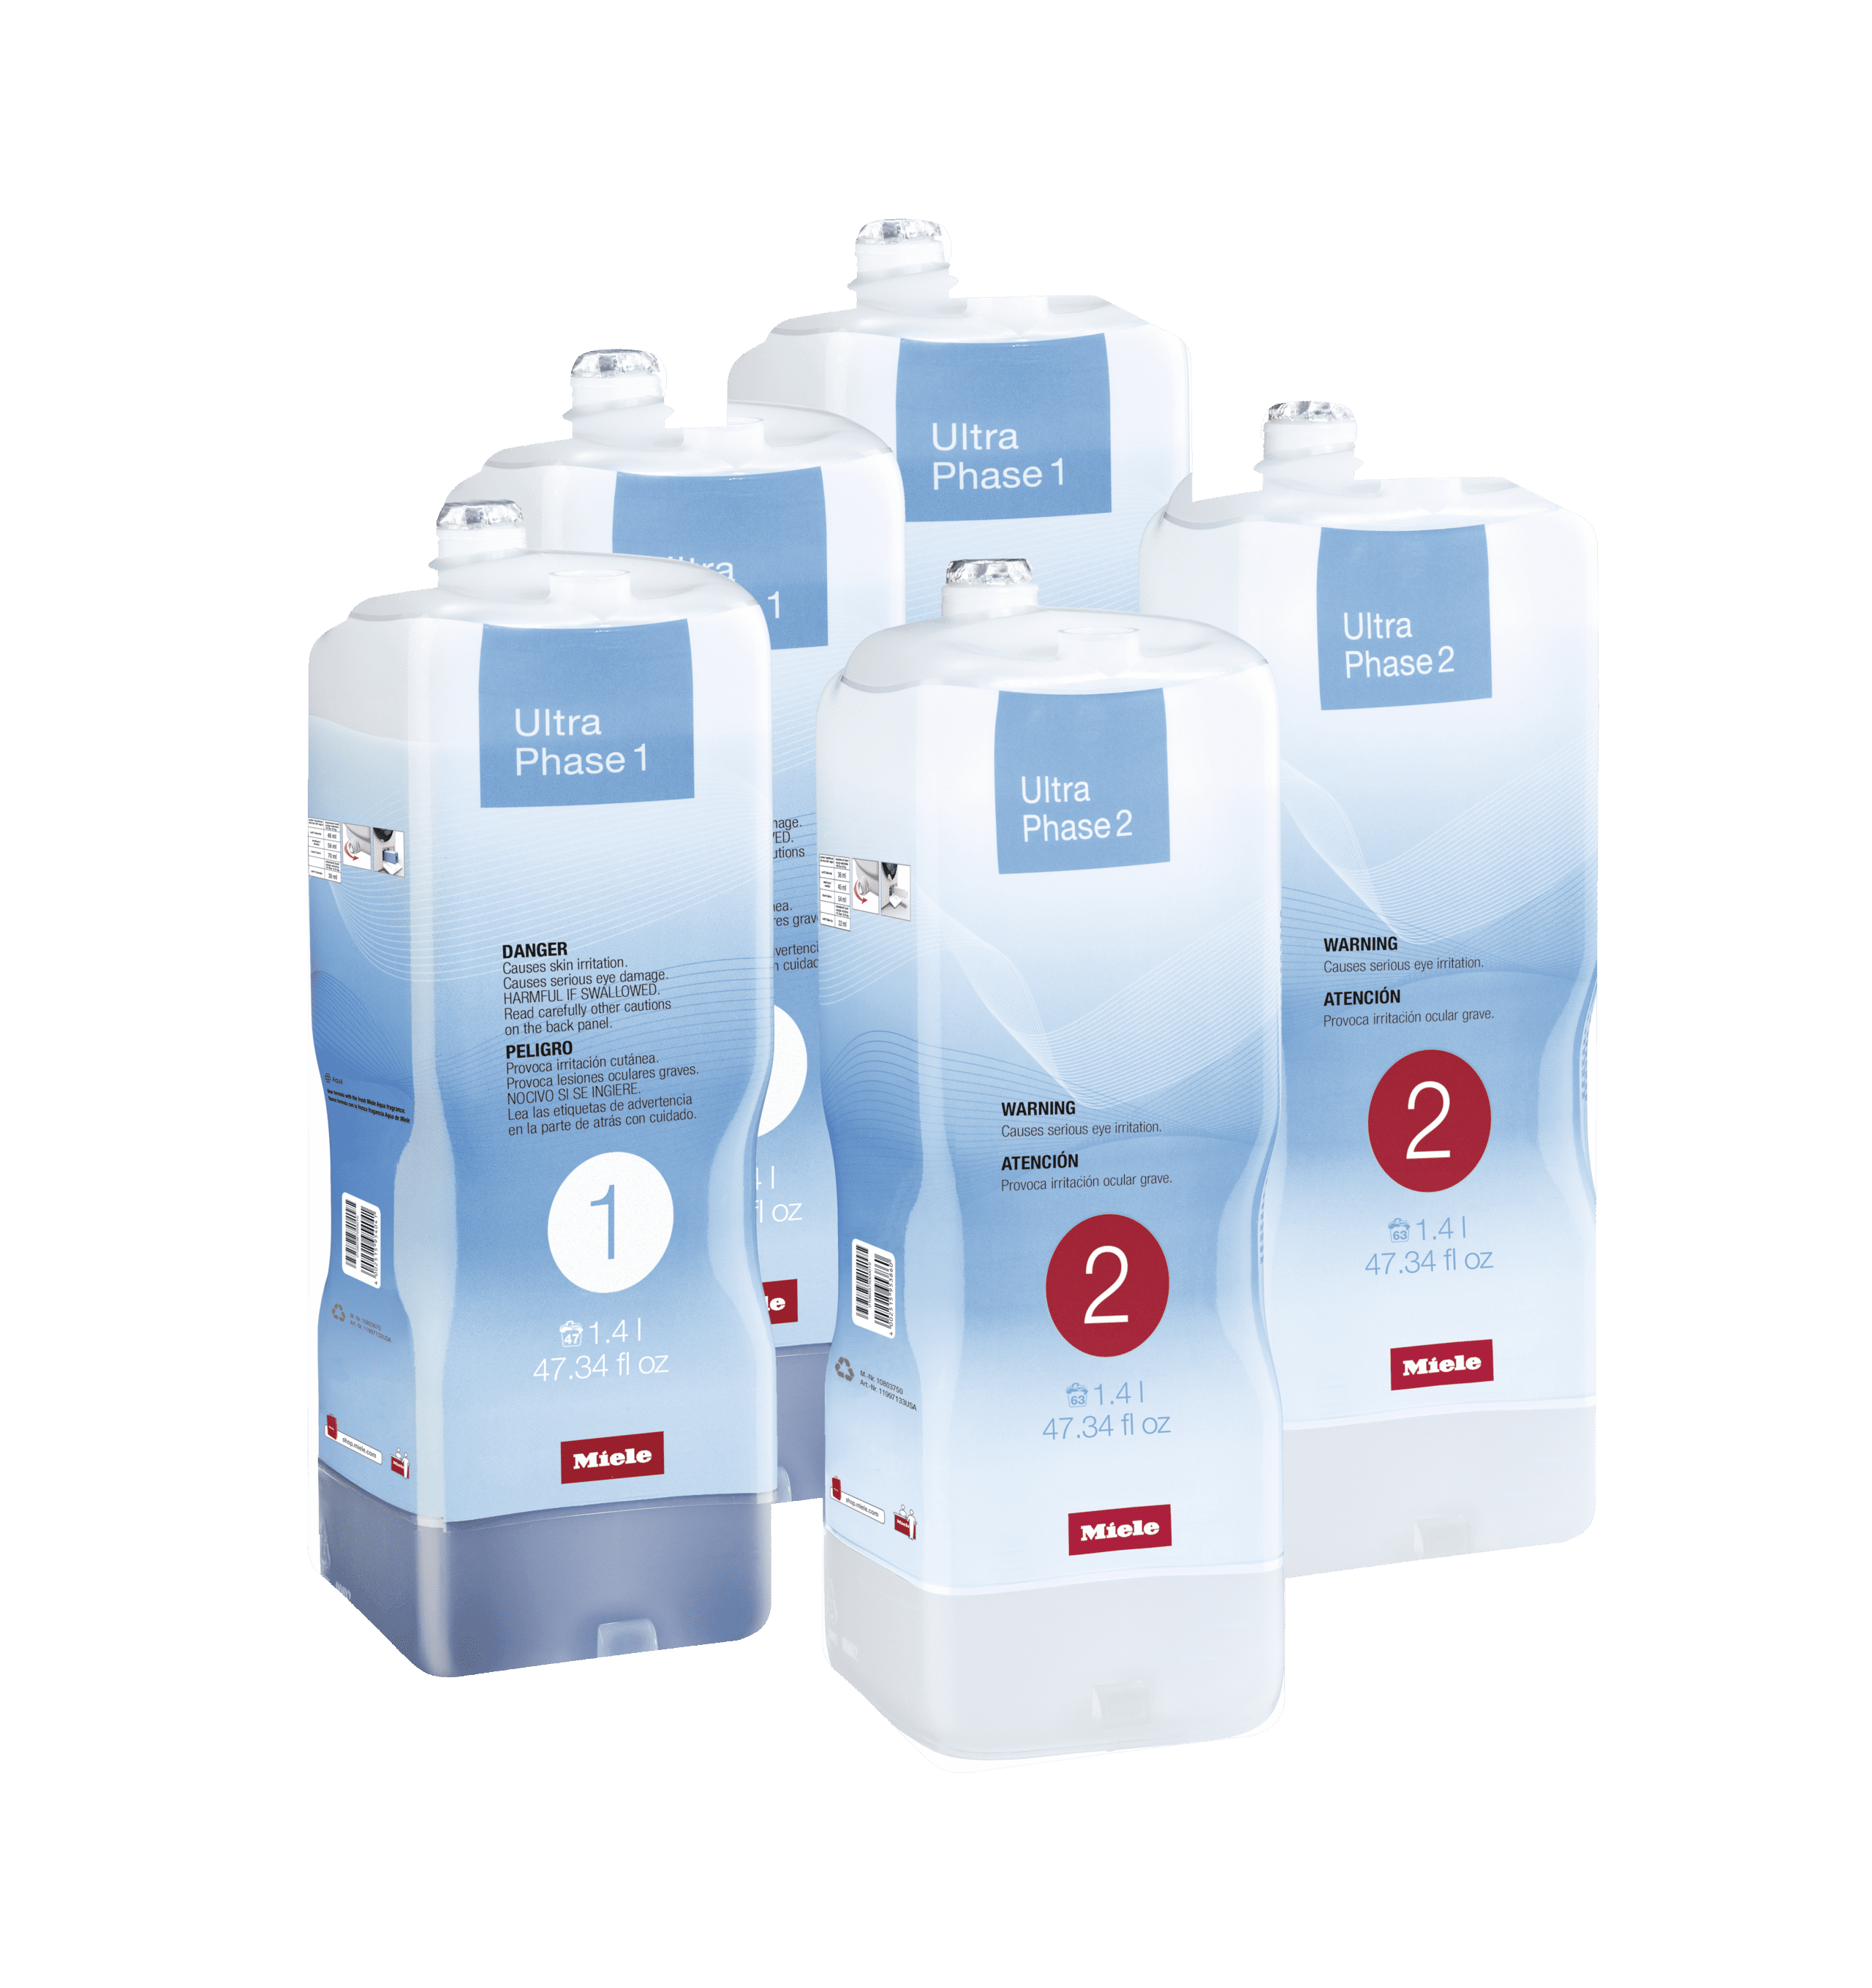 Miele SETULTRAPHASE Set Ultraphase - Miele Ultraphase 1 And 2 Half-Year Reserve Miele Detergents